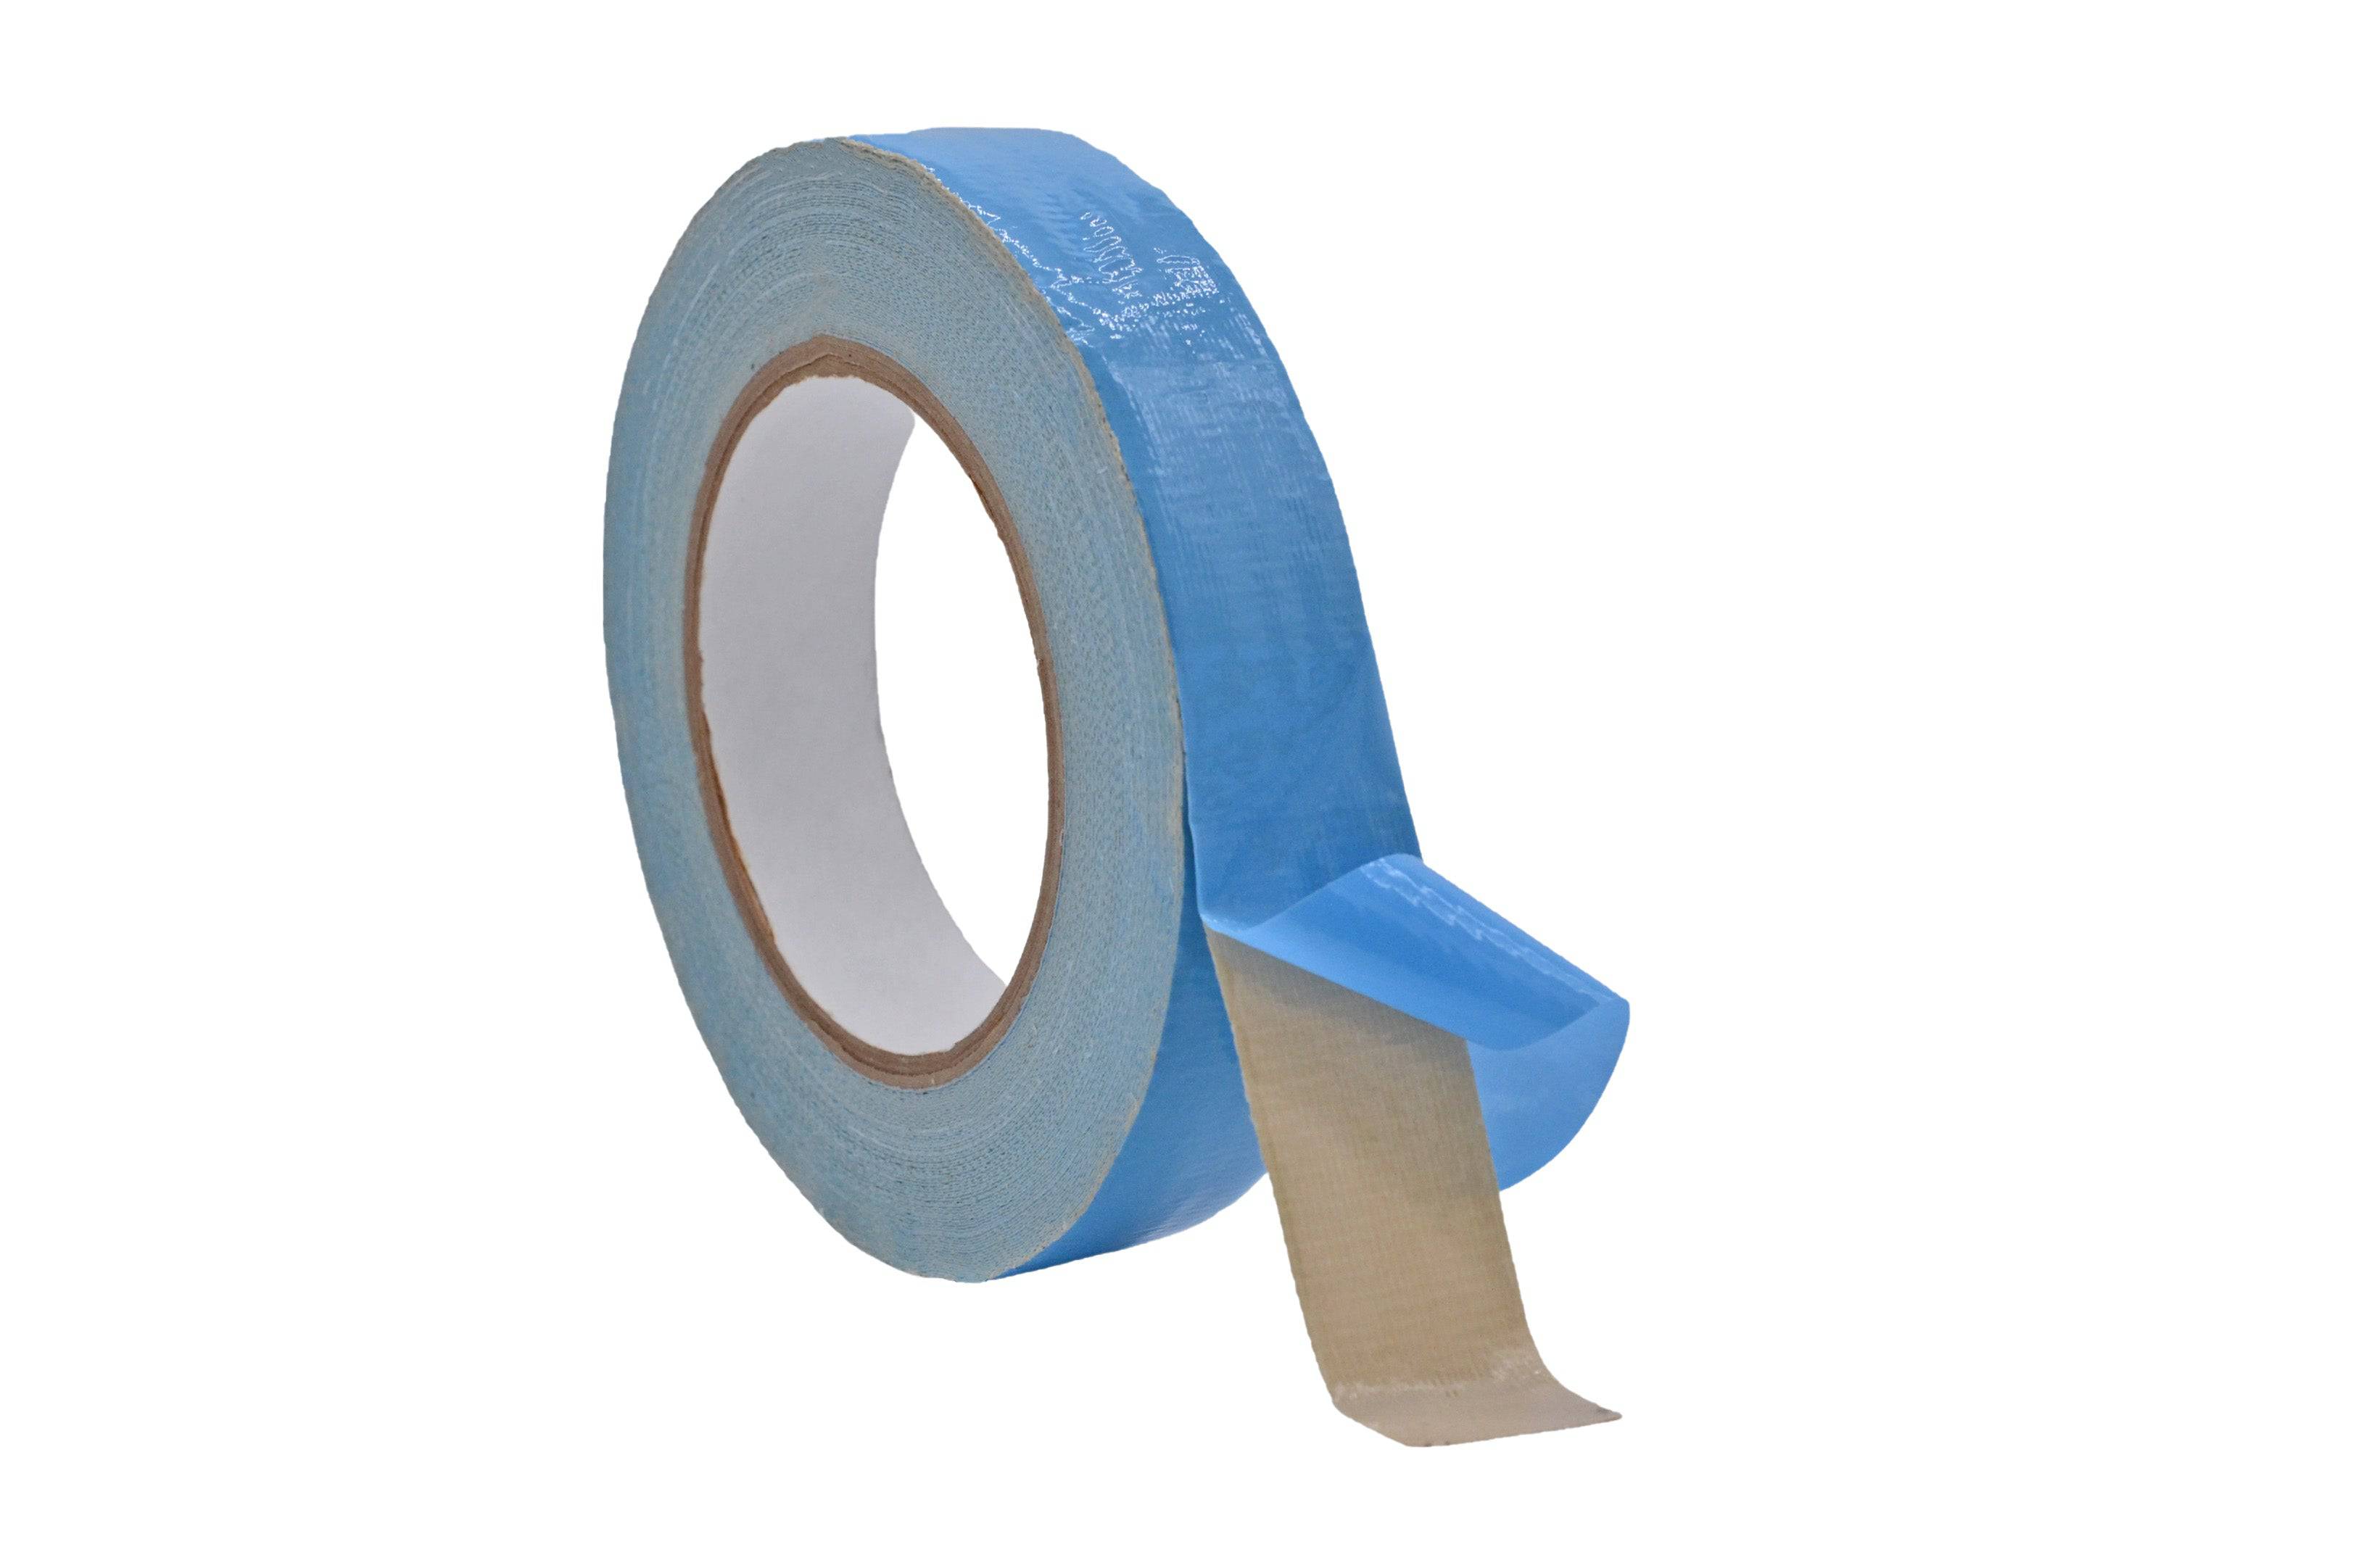 DOITOOL 1 Roll Double Sided Cloth Tape mounting Tape Sticky Tape for mats  for Hardwood Floors Non Slip Rug Tape Portable Wrapping Tape Two Sided Tape